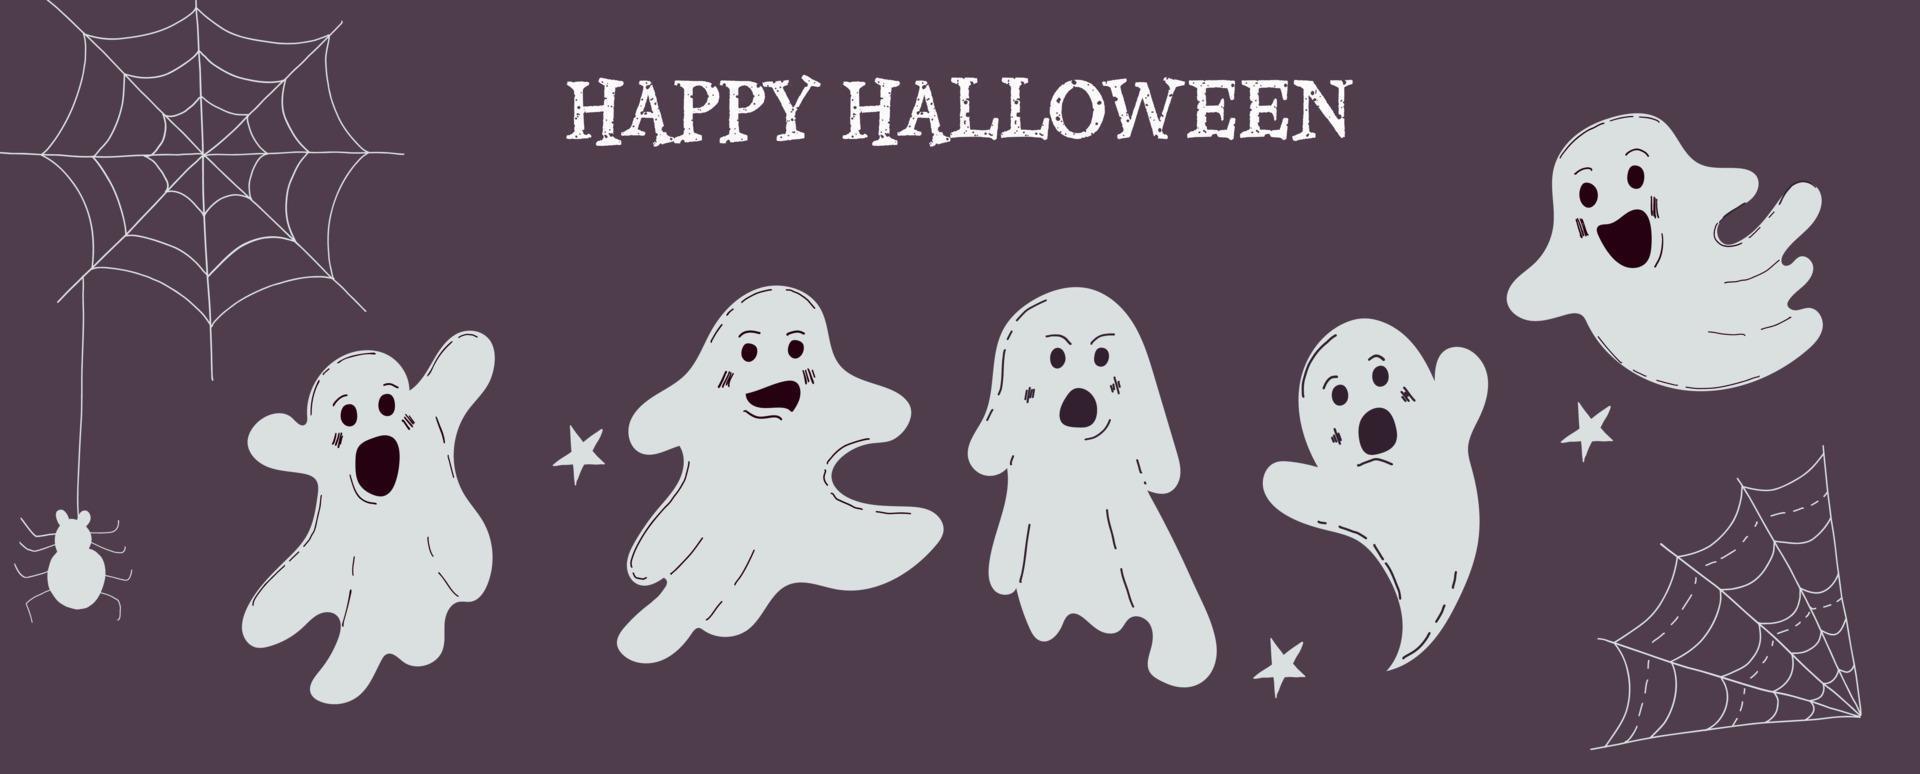 Set of elements for Halloween holiday with cute ghosts vector